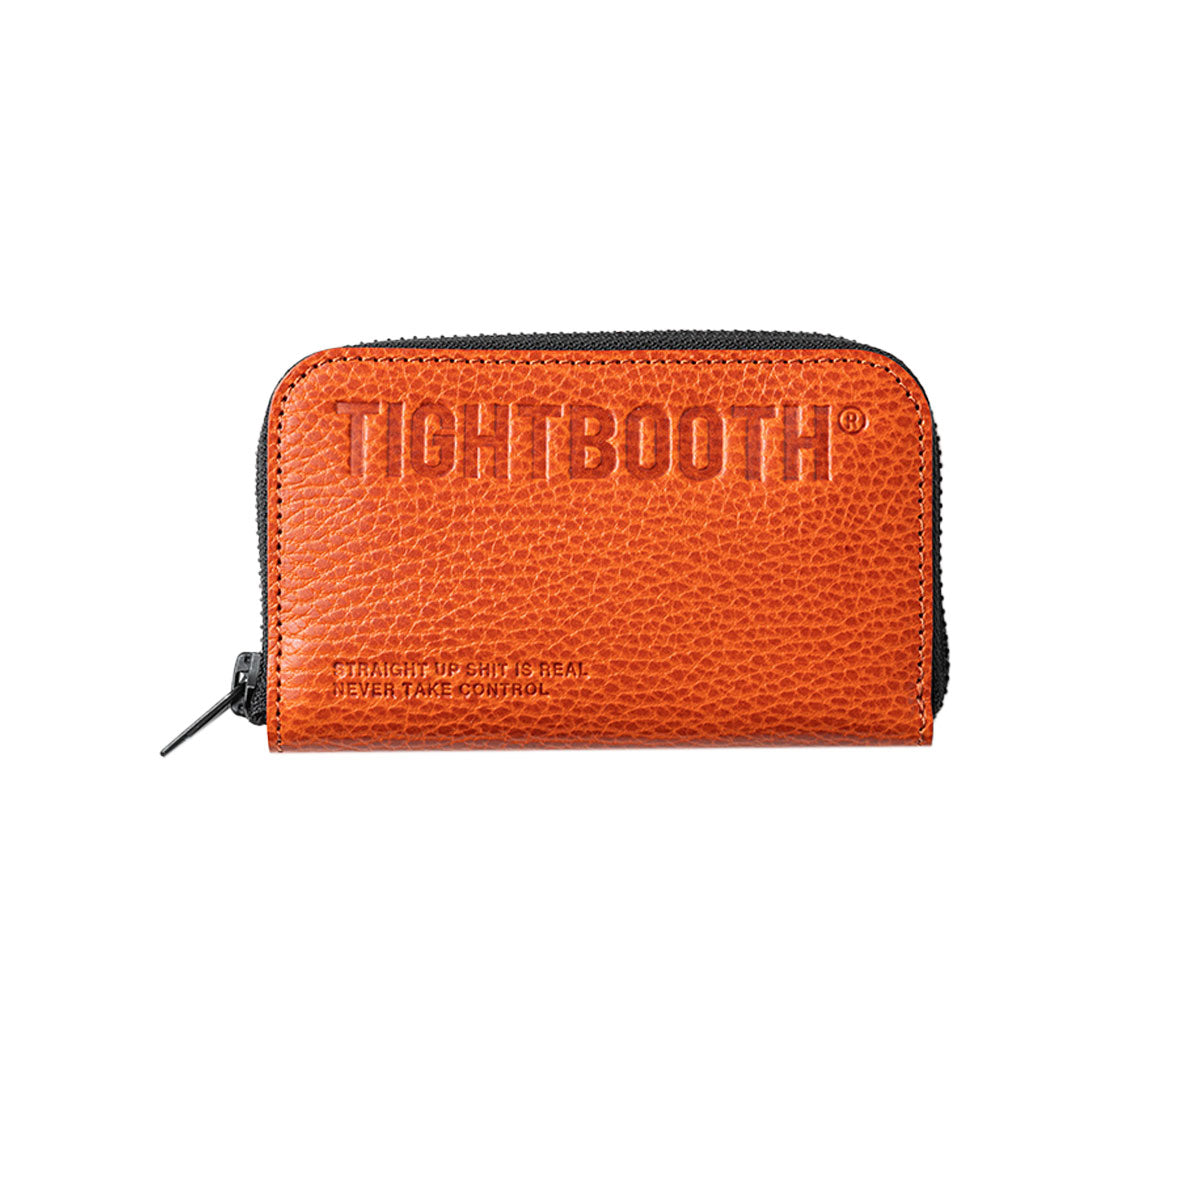 TIGHTBOOTH LEATHER ZIP AROUND WALLET - 小物